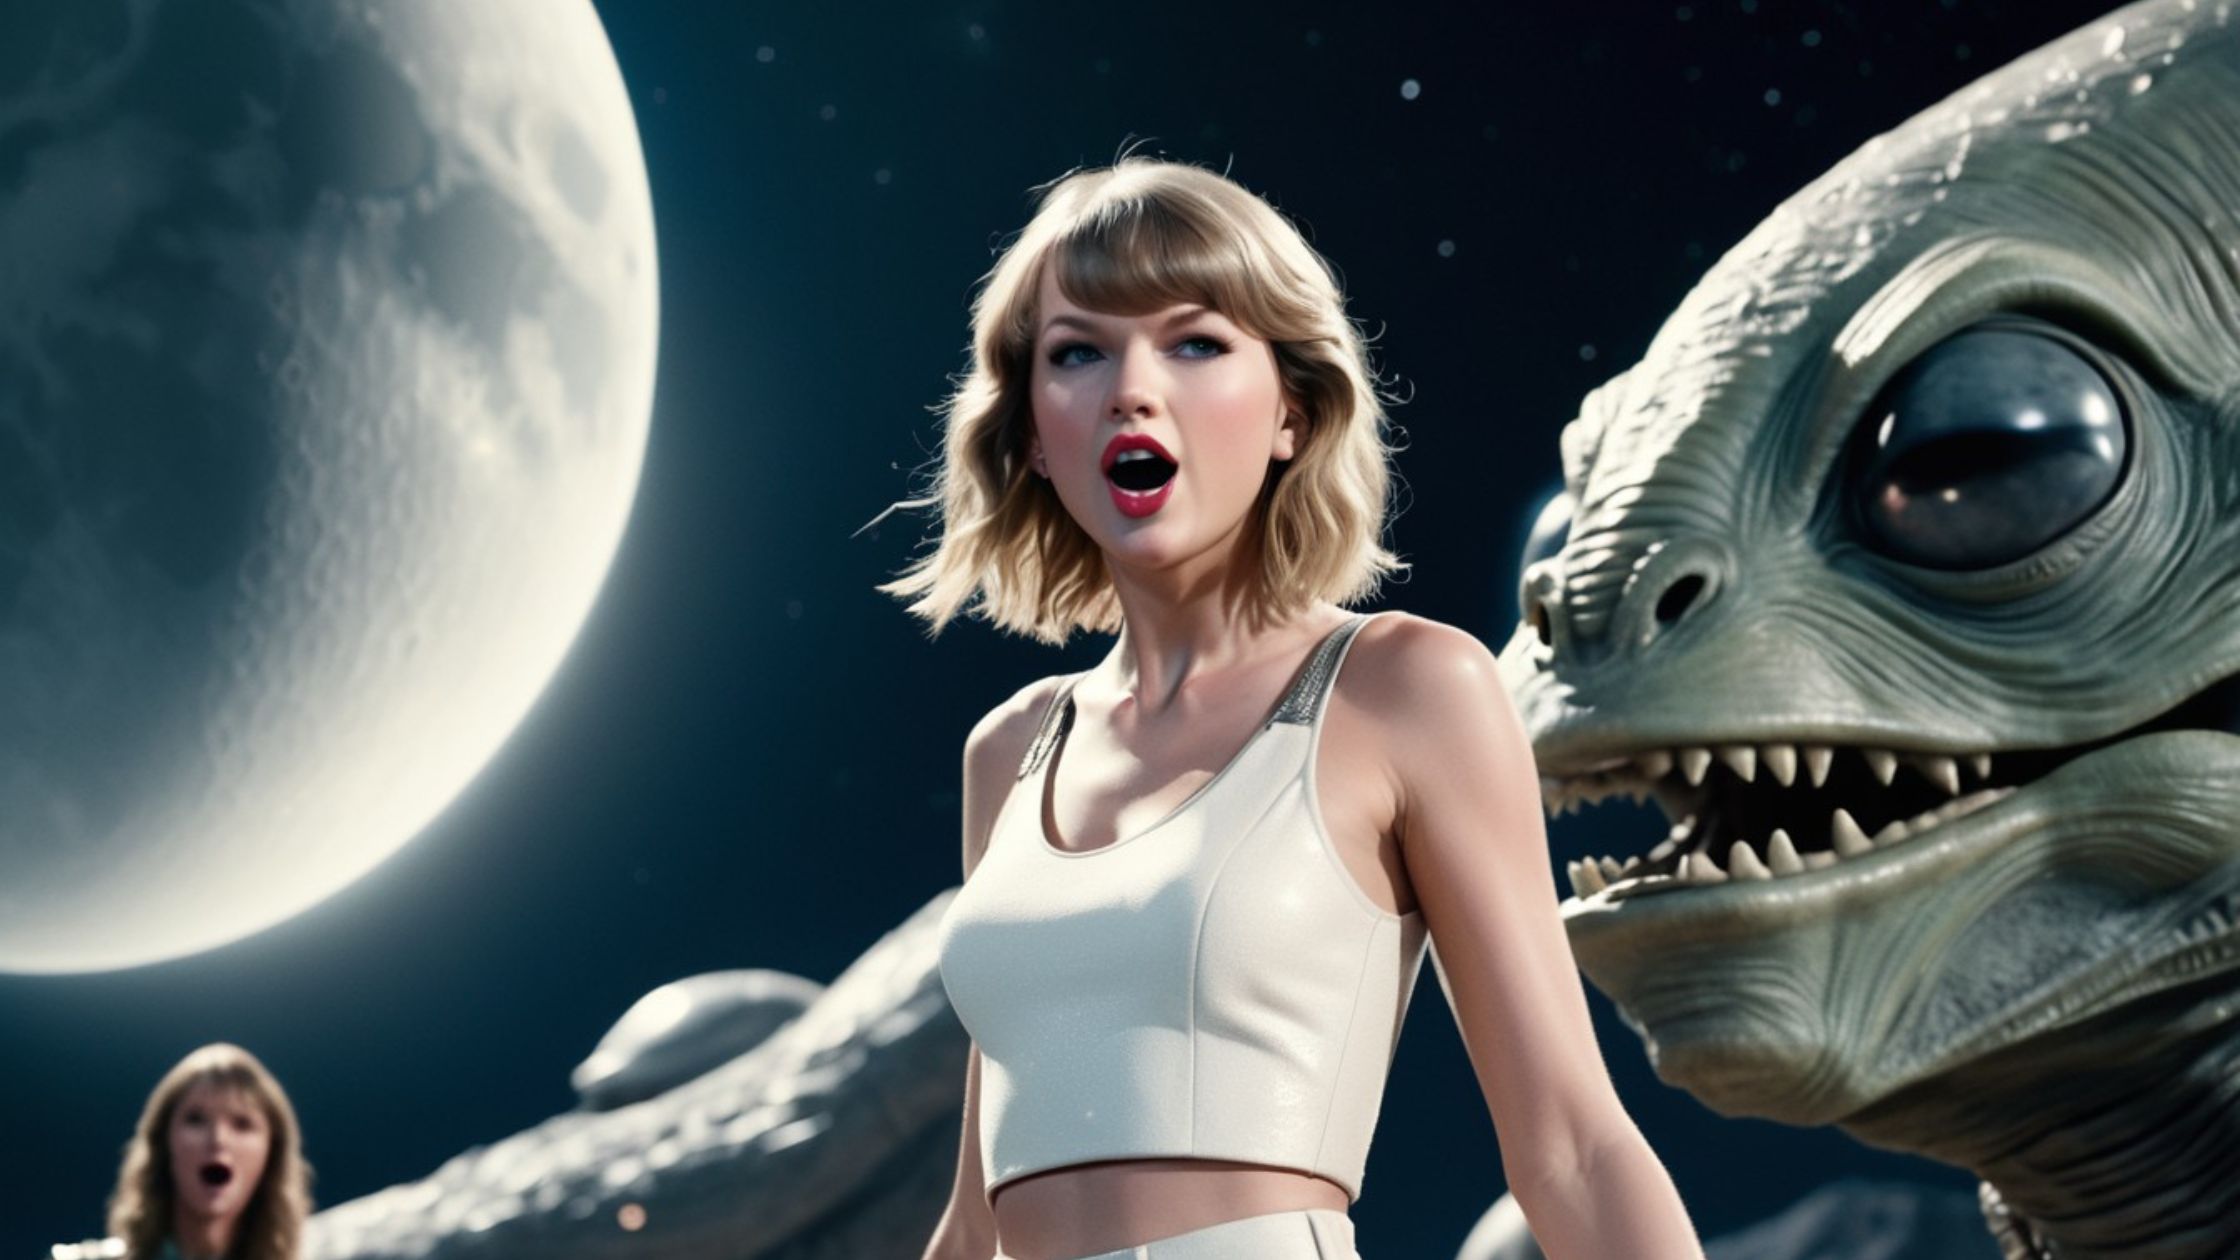 taylor swift ai pictures